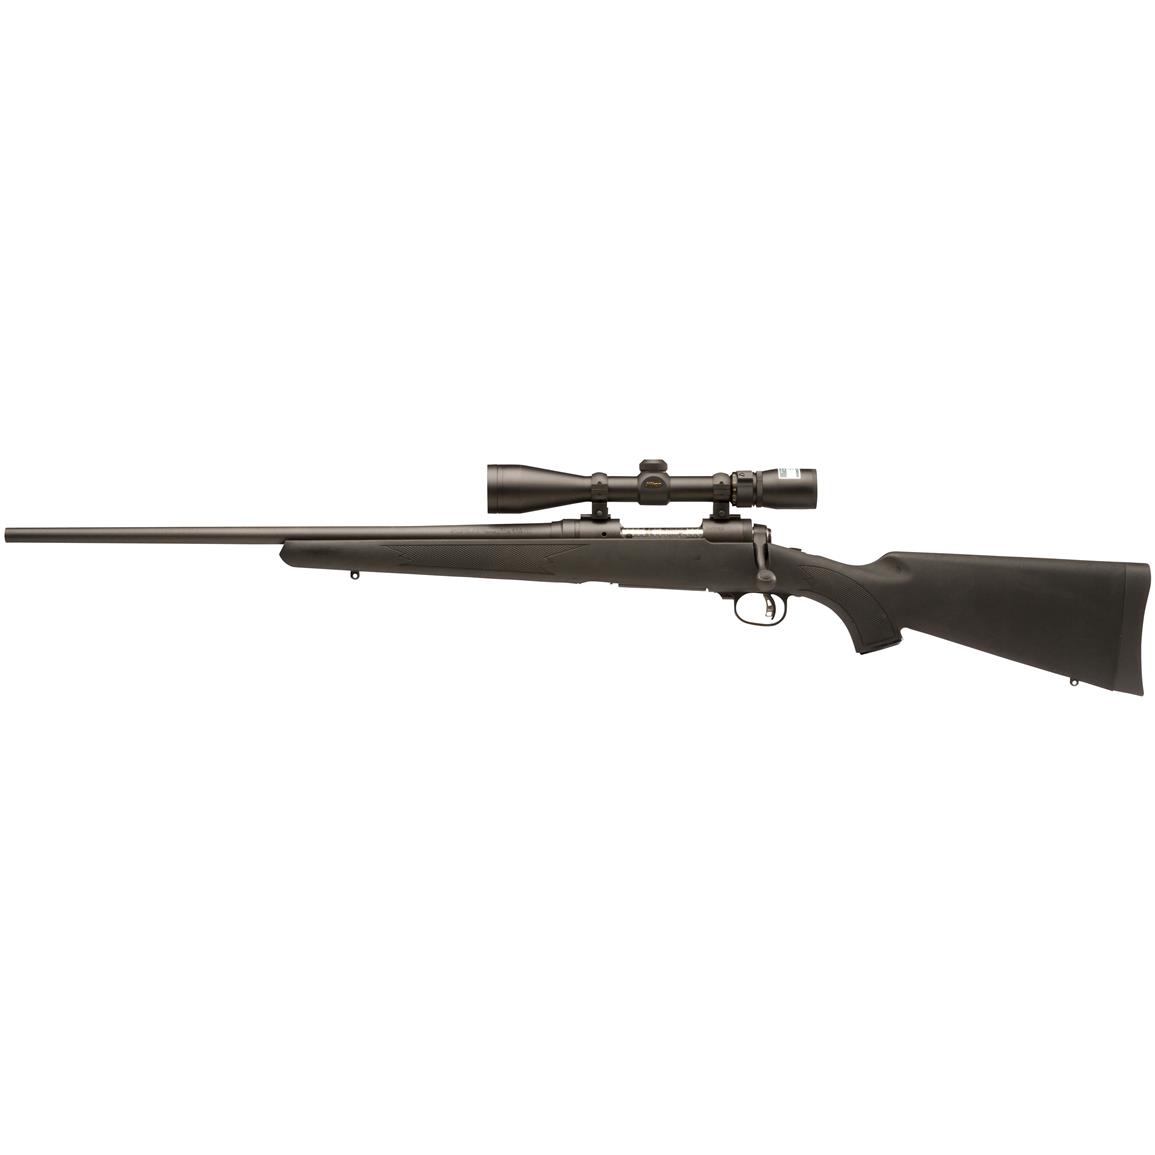 Savage 111 Trophy Hunter XP, Bolt Action, .270 Winchester, Nikon BDC Scope, 5 Rounds, Left Handed